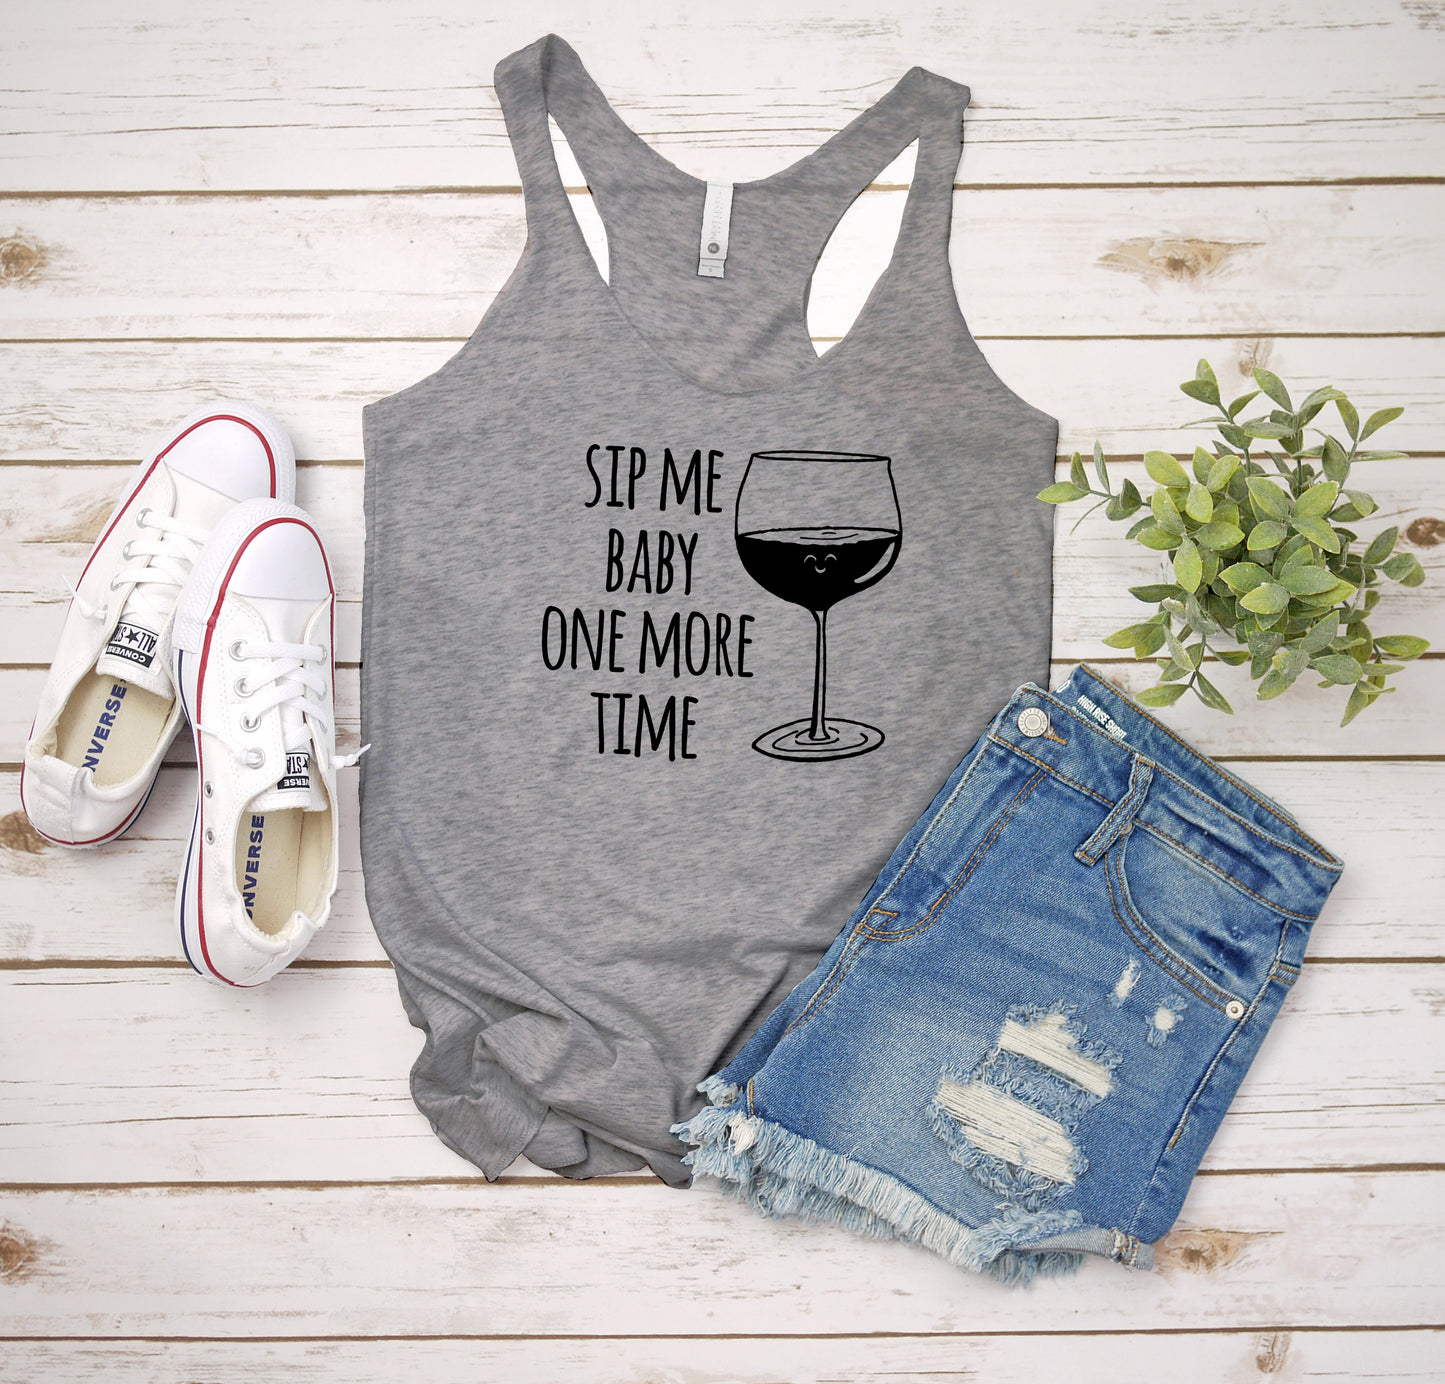 Sip Me Baby One More Time (Wine) - Women's Tank - Heather Gray, Tahiti, or Envy